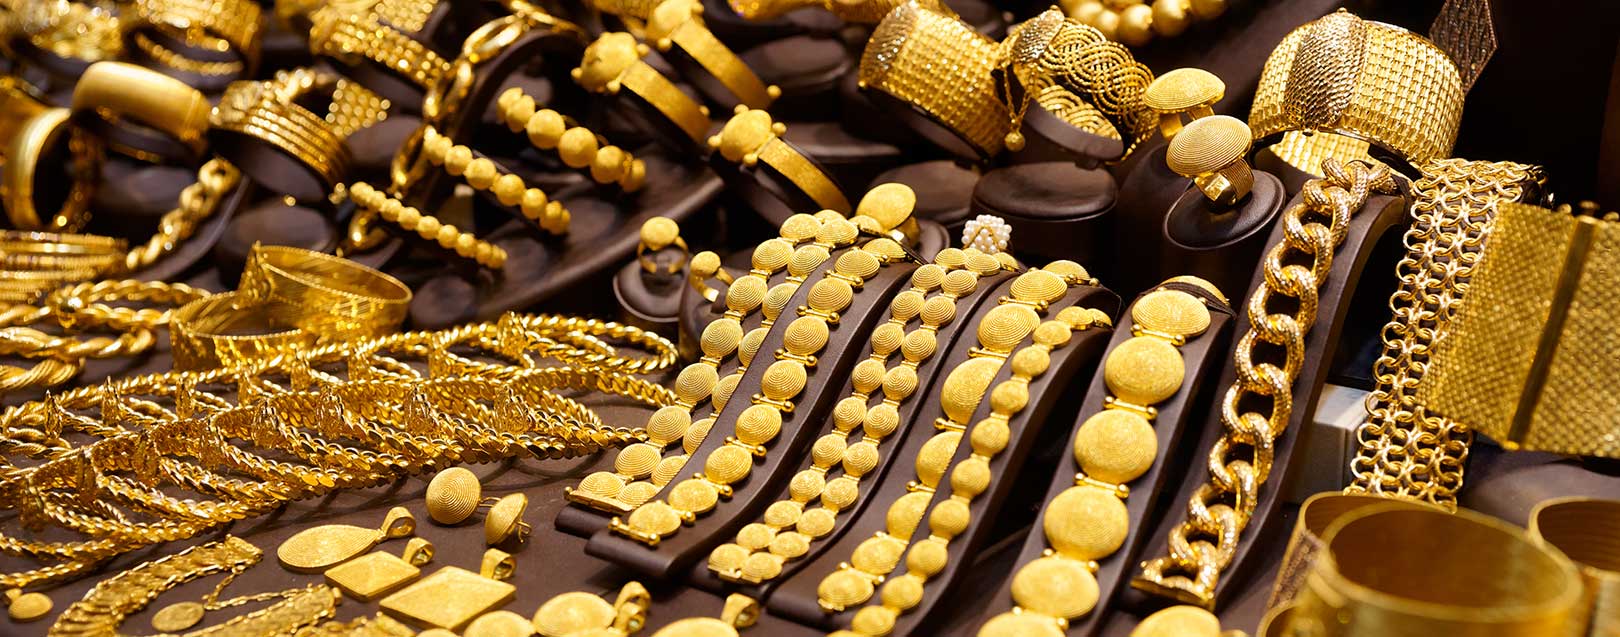 Rajesh Exports wants Govt clearance to ship gold jewellery above 22-carat